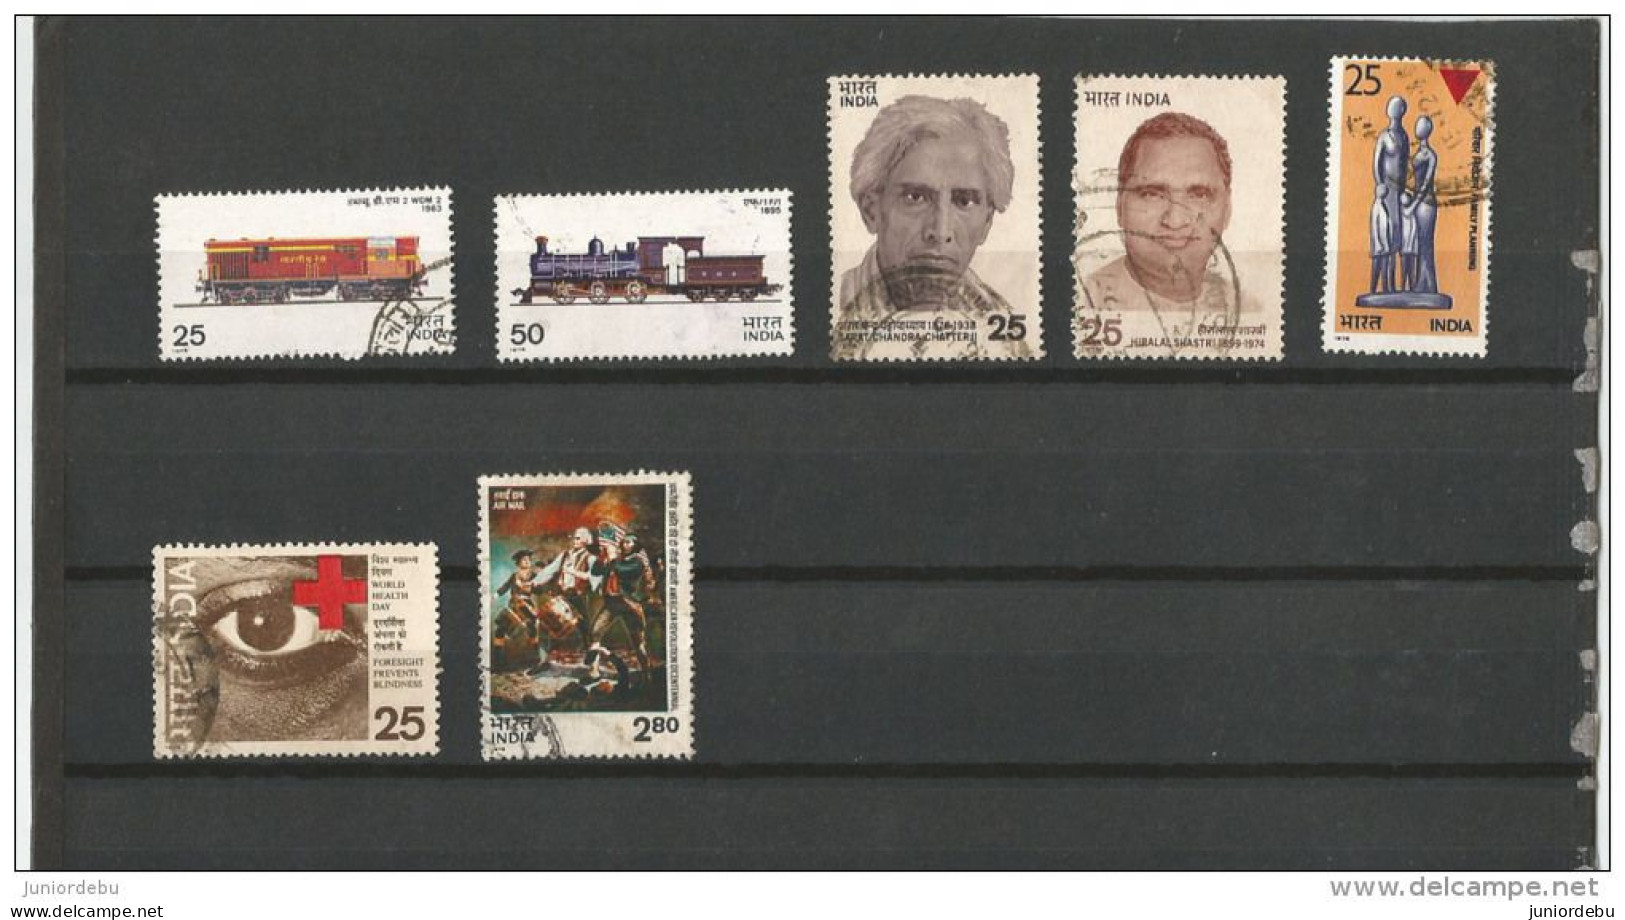 INDIA - 1976 - 7  Different Commemorative Stamps - USED. ( Condition As Per Scan ) ( OL 07/07/2013) - Gebraucht